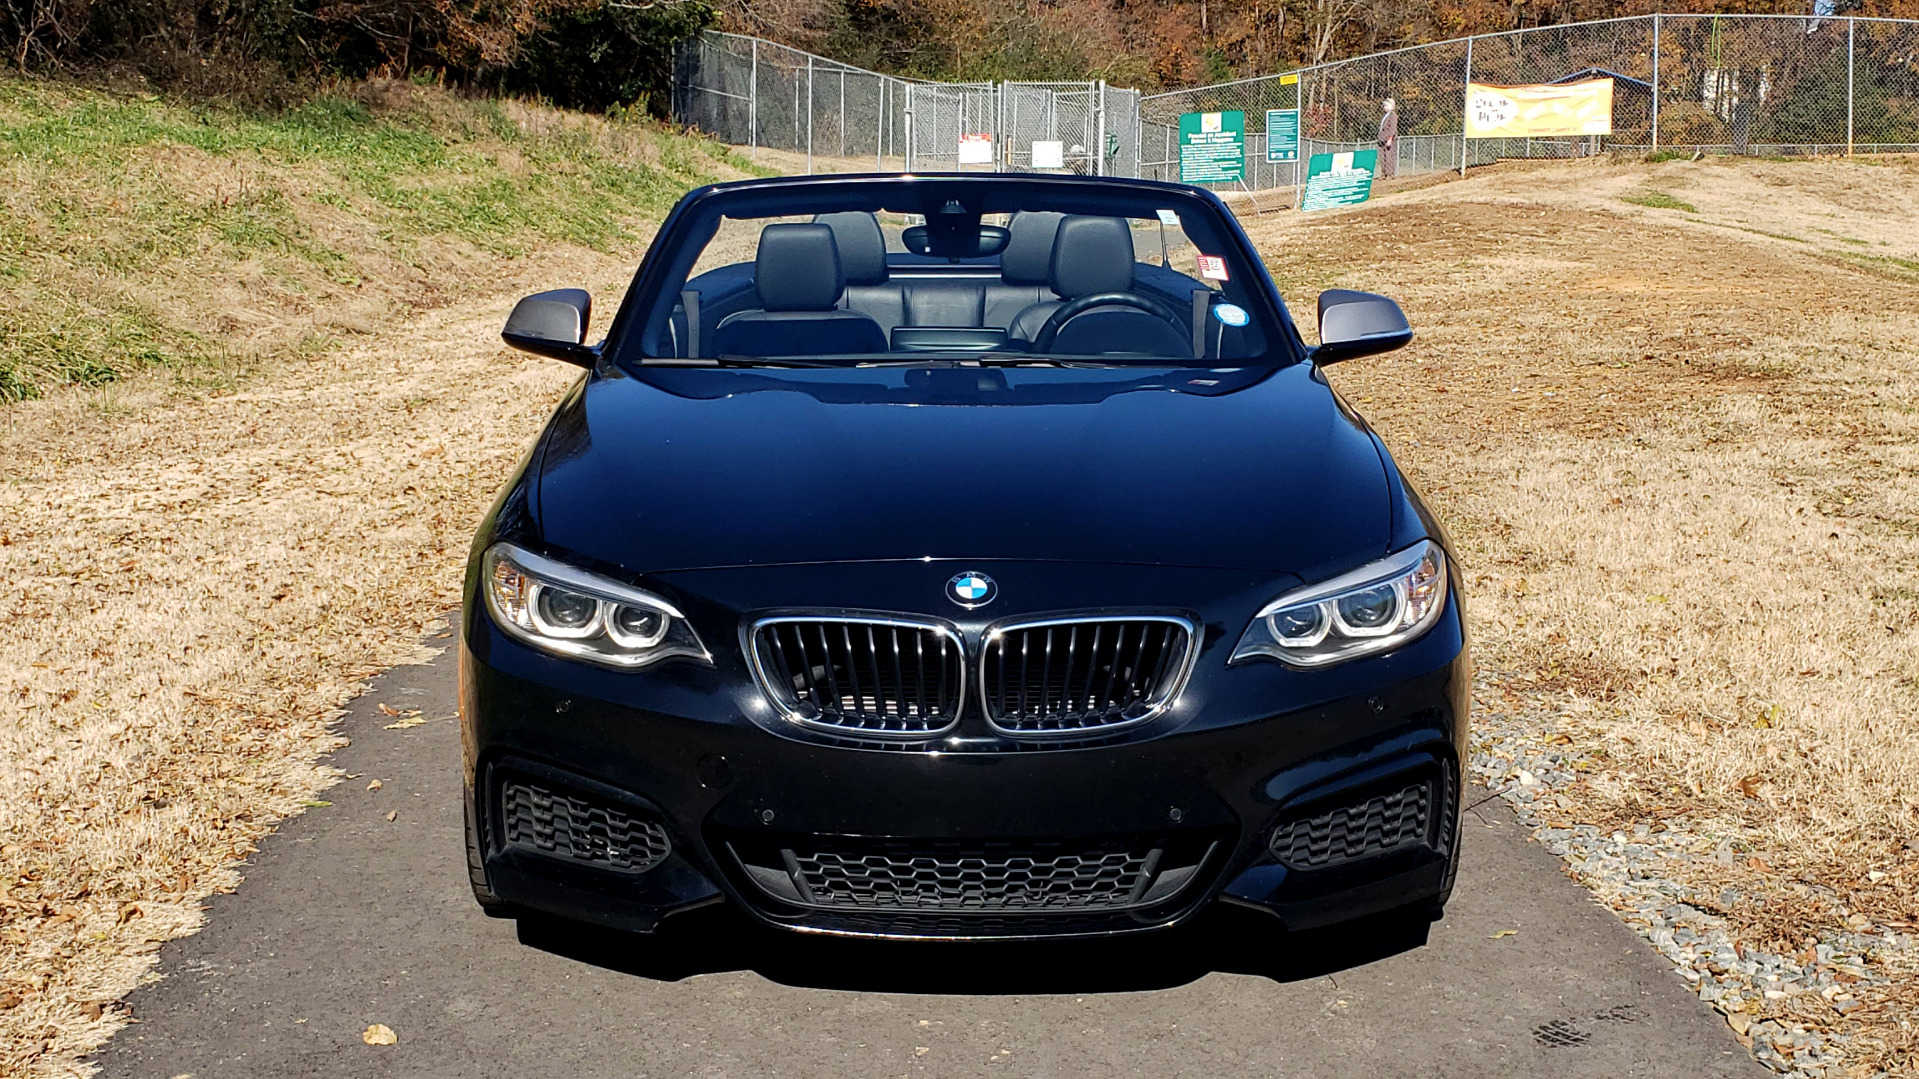 Used 2016 BMW 2 SERIES M235i CONV / DRVR ASST PLUS / TECH / HTD STS / H/K SOUND for sale Sold at Formula Imports in Charlotte NC 28227 11